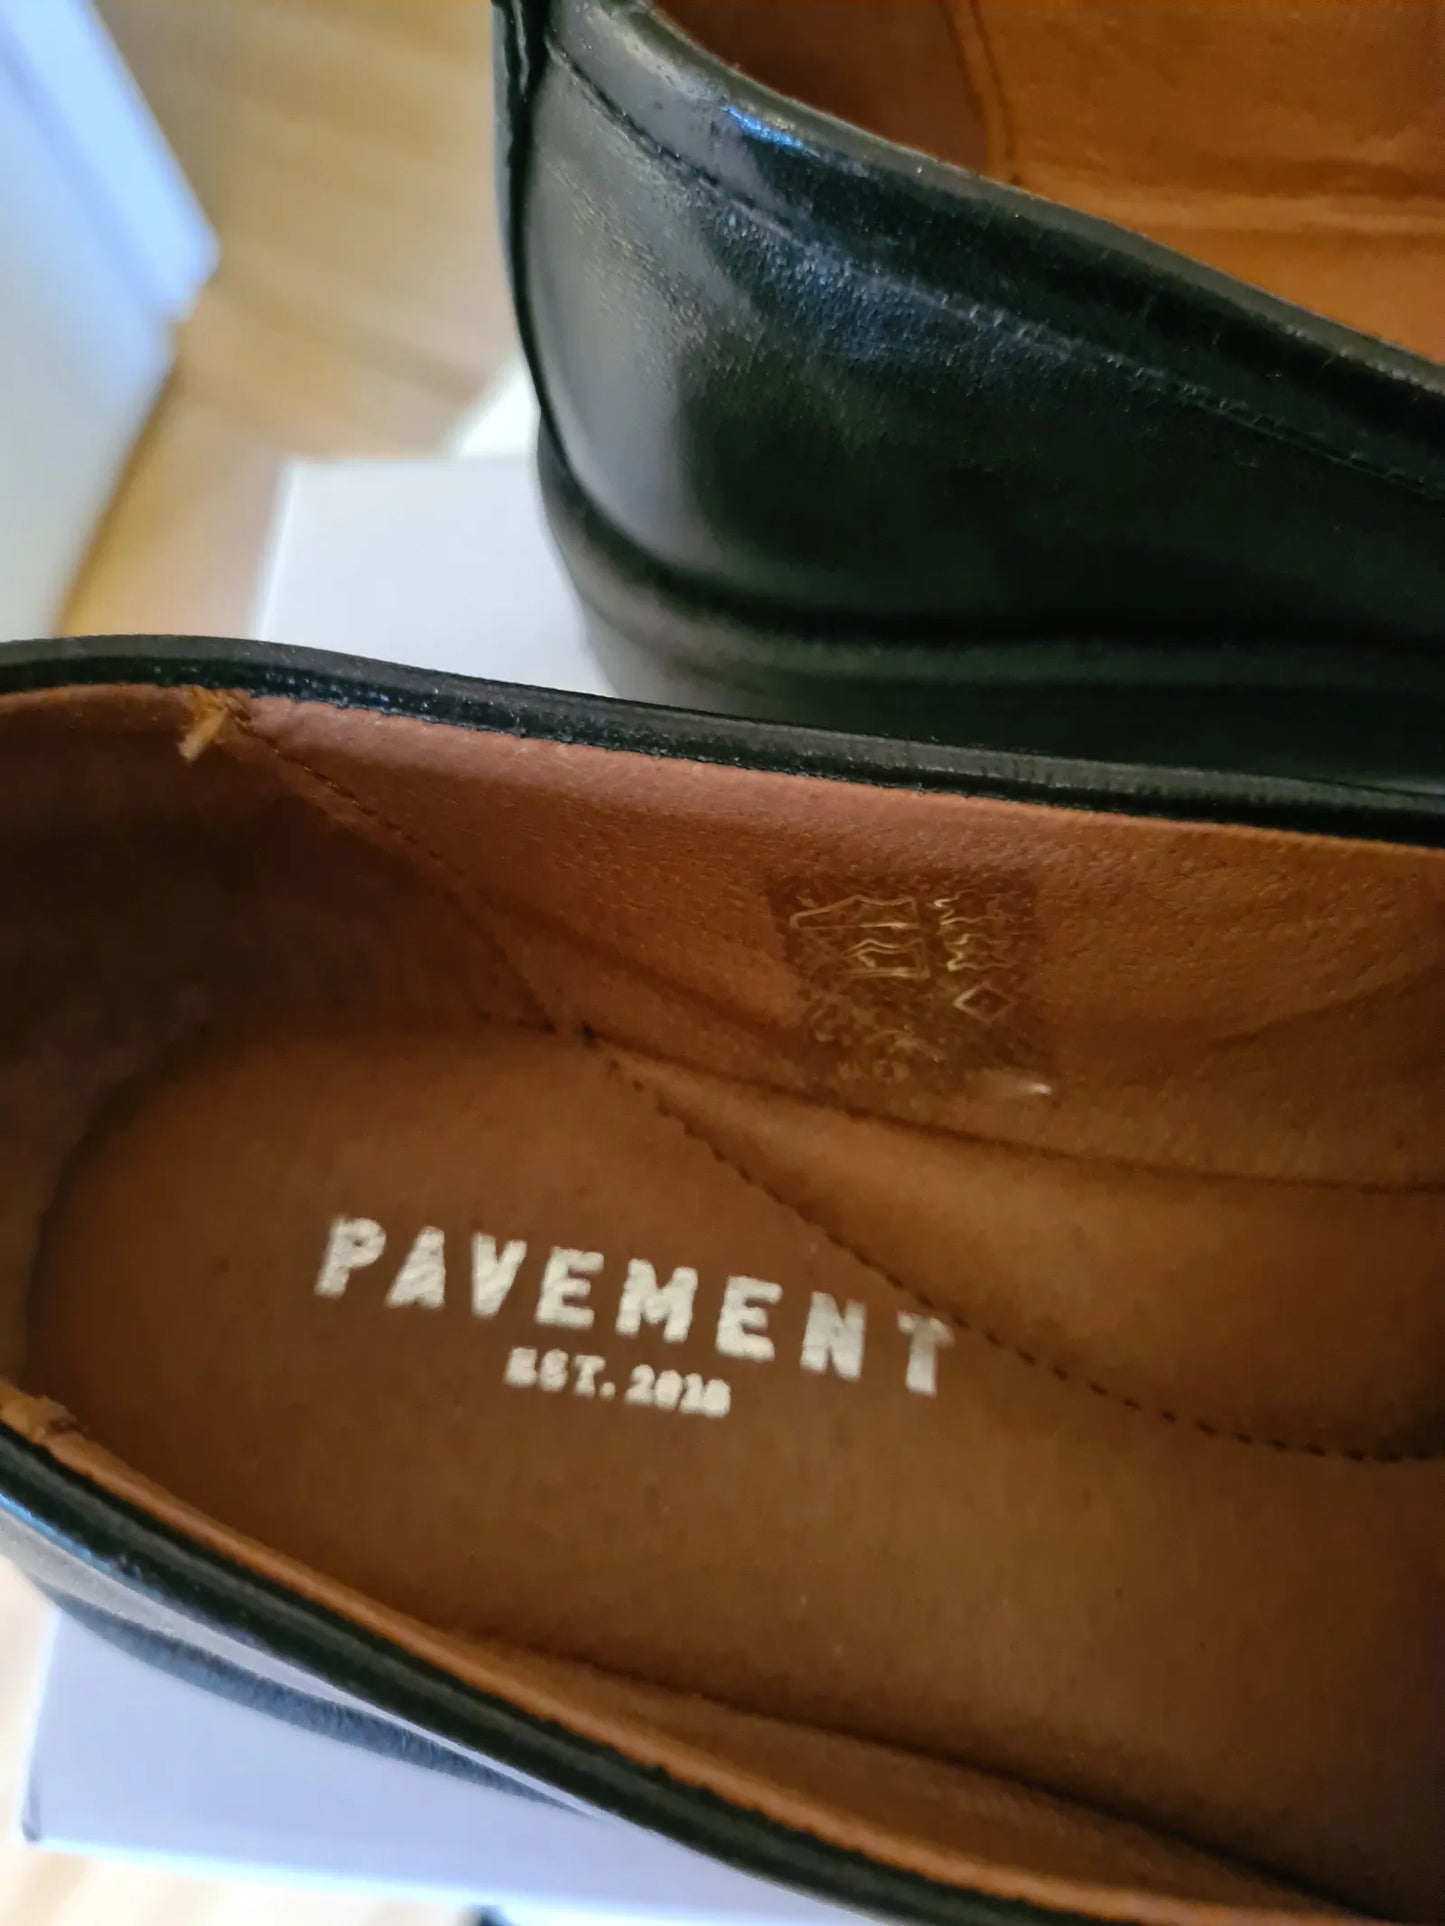 Pavement-skinnloafers NWOT